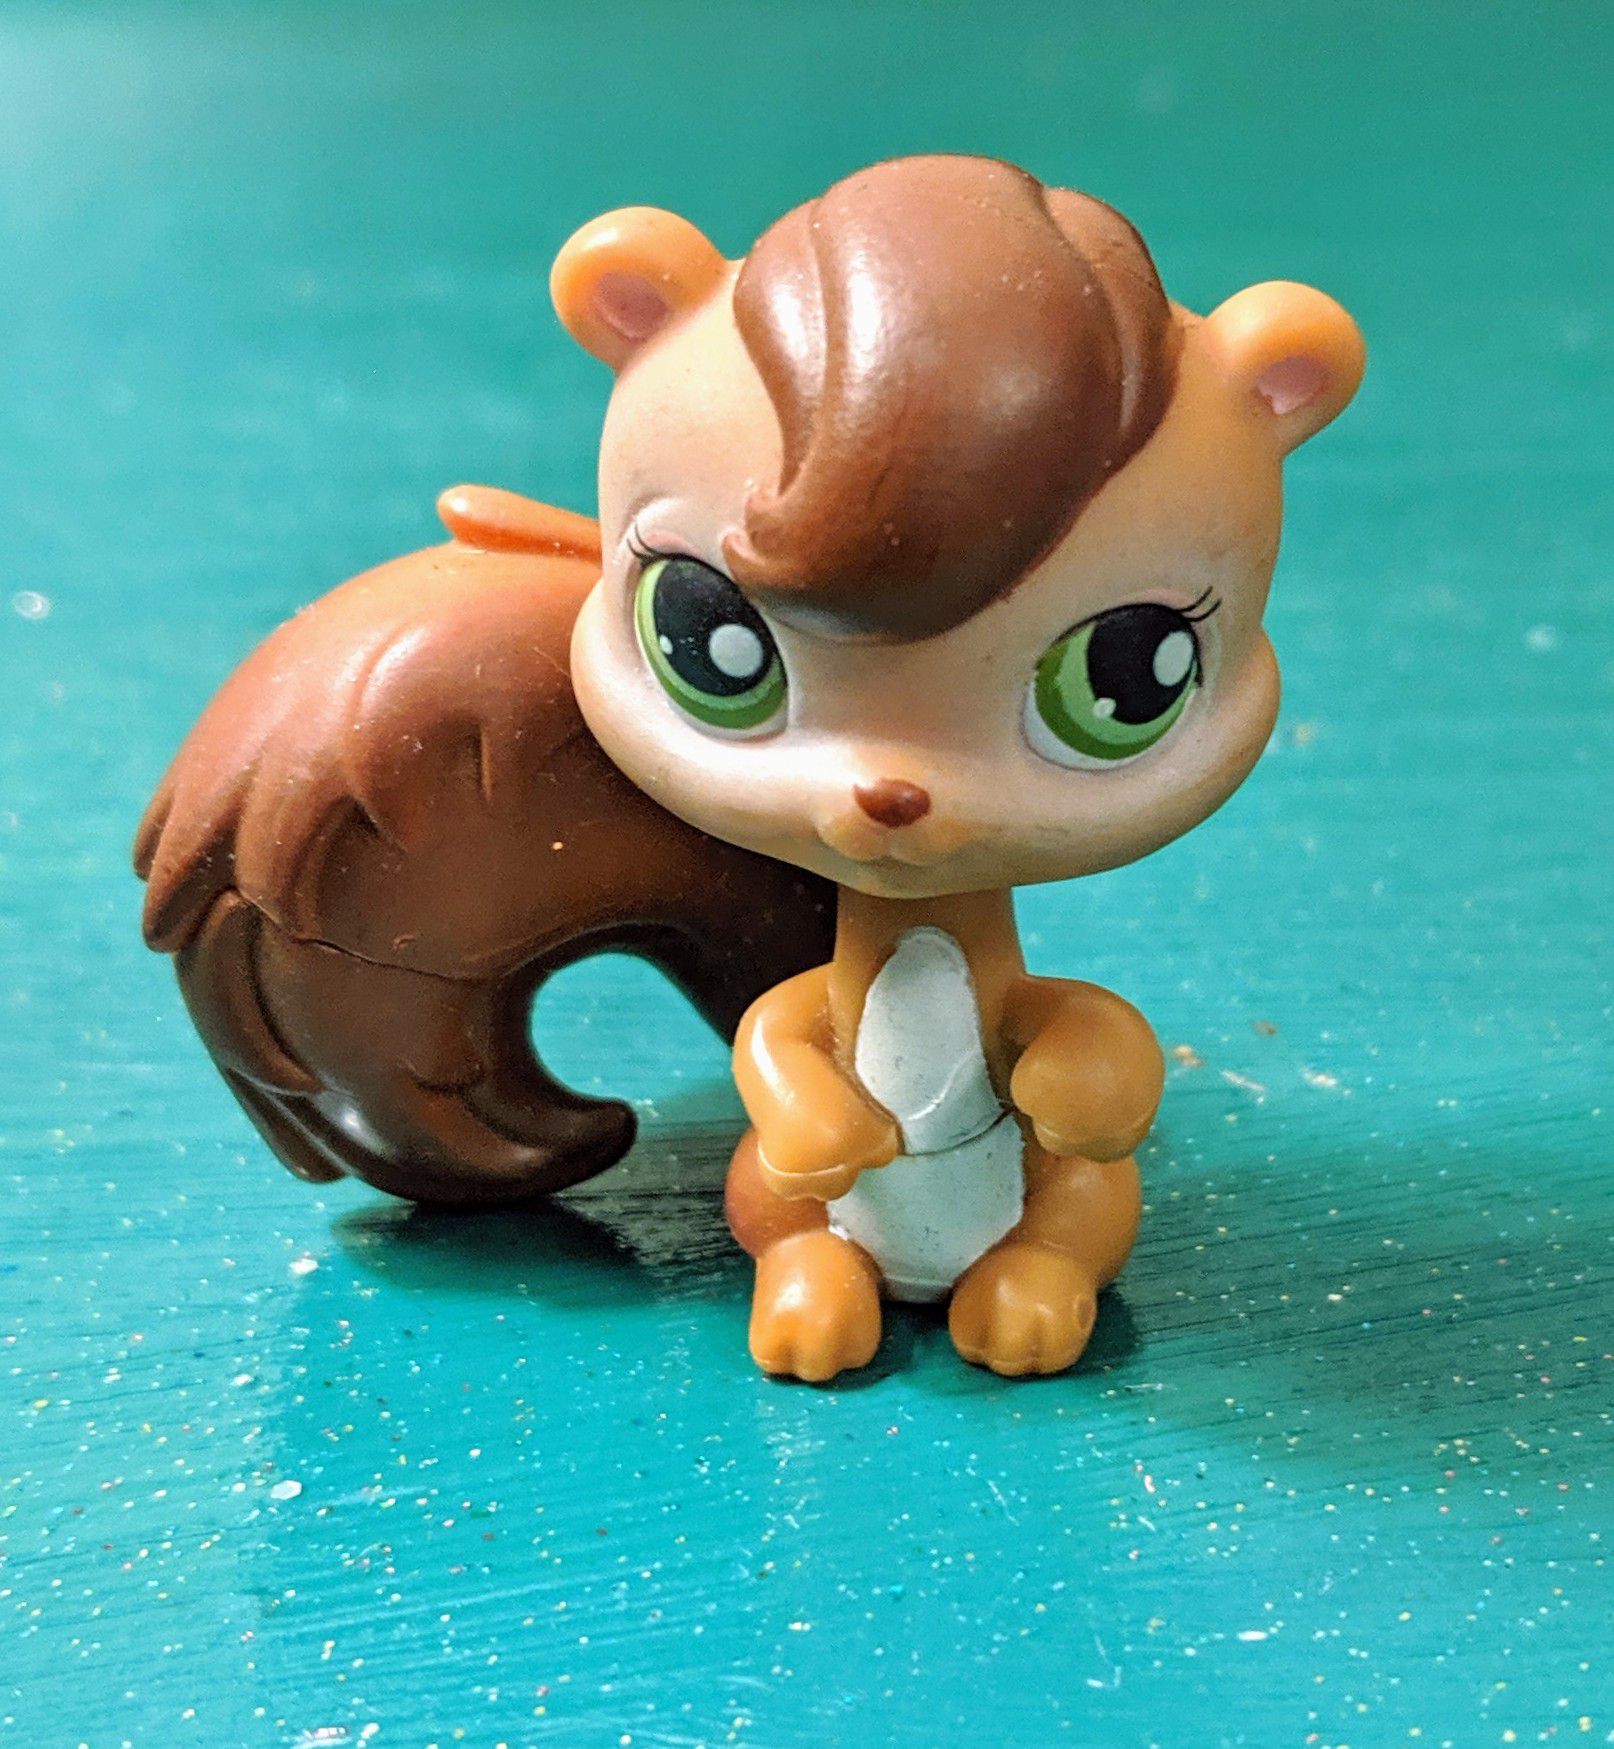 Littlest Pet Shop Brown and White squirrel with green eyes #195